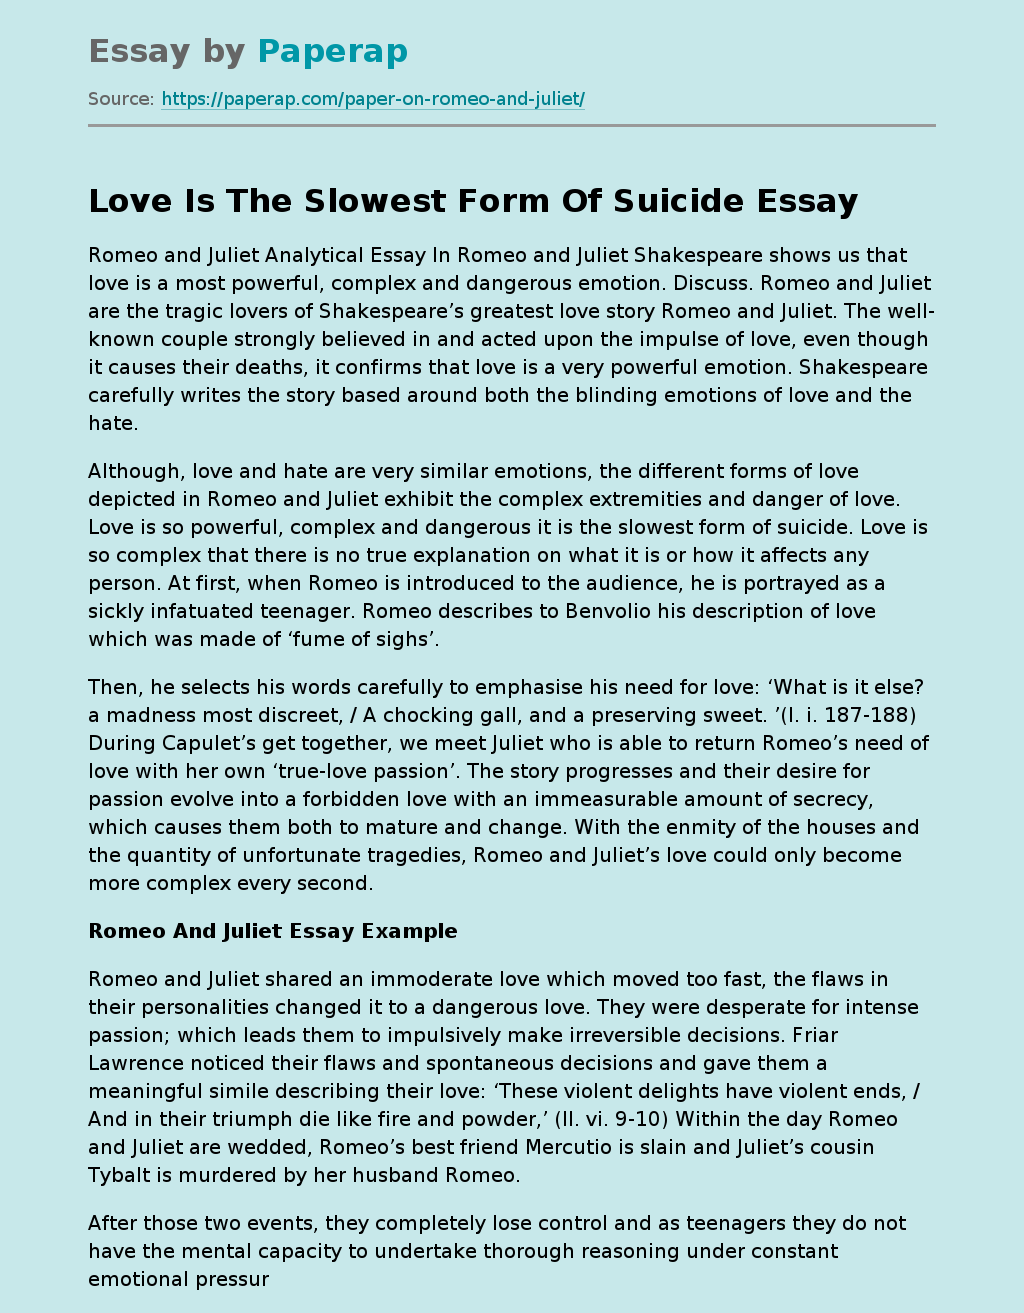 Love Is The Slowest Form Of Suicide